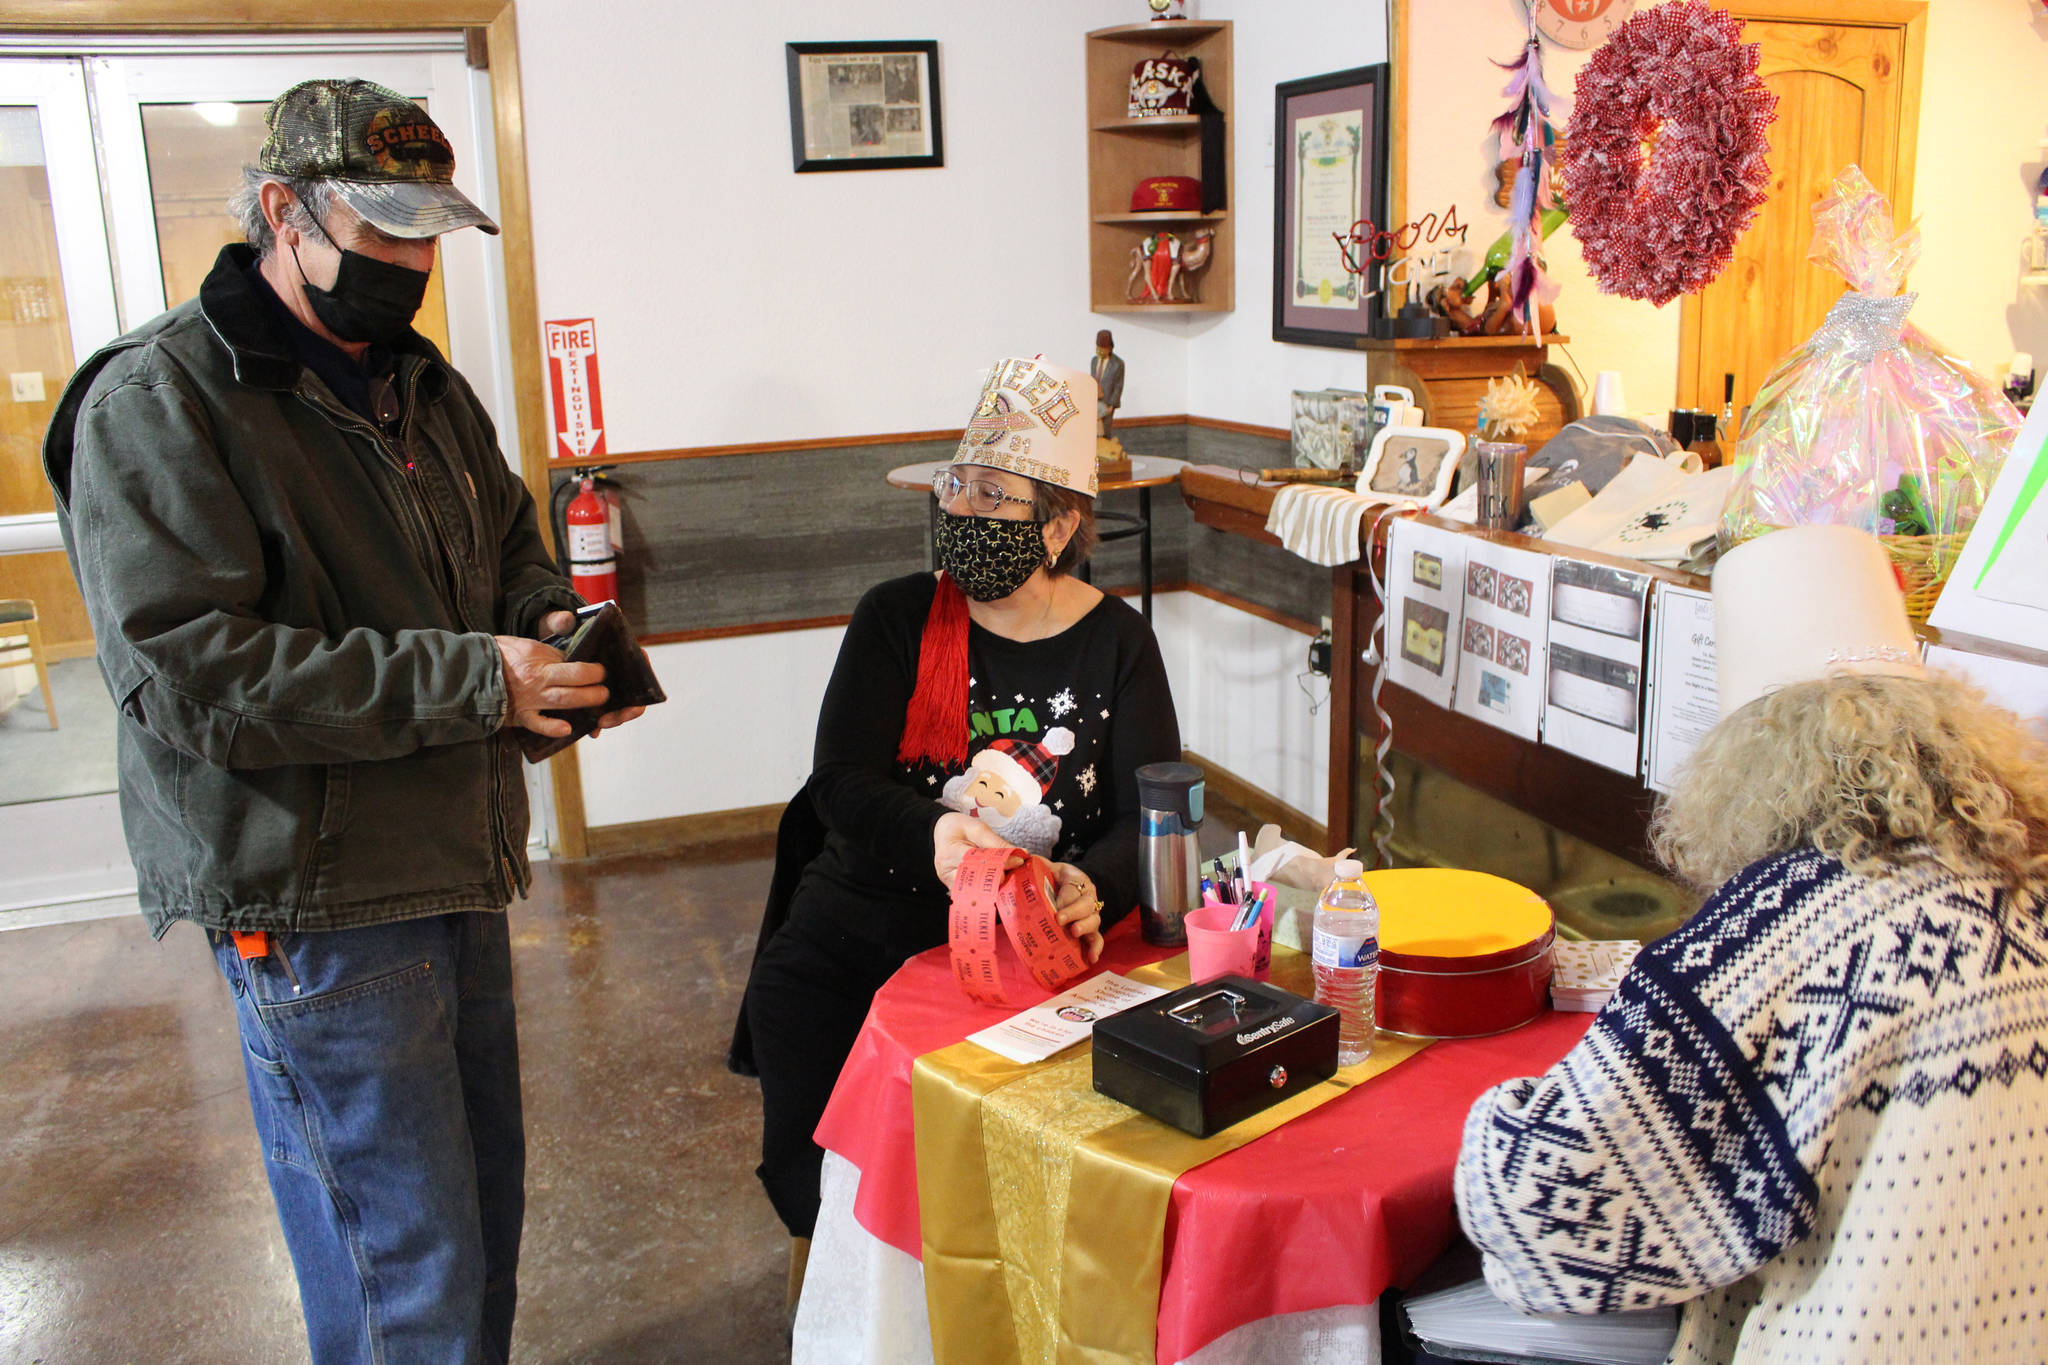 Brian Mazurek/Peninsula Clarion 
Bob Mohni, of Cooper Landing, buys door prize tickets from Cheryle James, High Priestess of the Lady Shriners of Alaska, during the inaugural Lady Shriner’s Craft Fair at the Kenai Soldotna Shrine Club on Saturday.